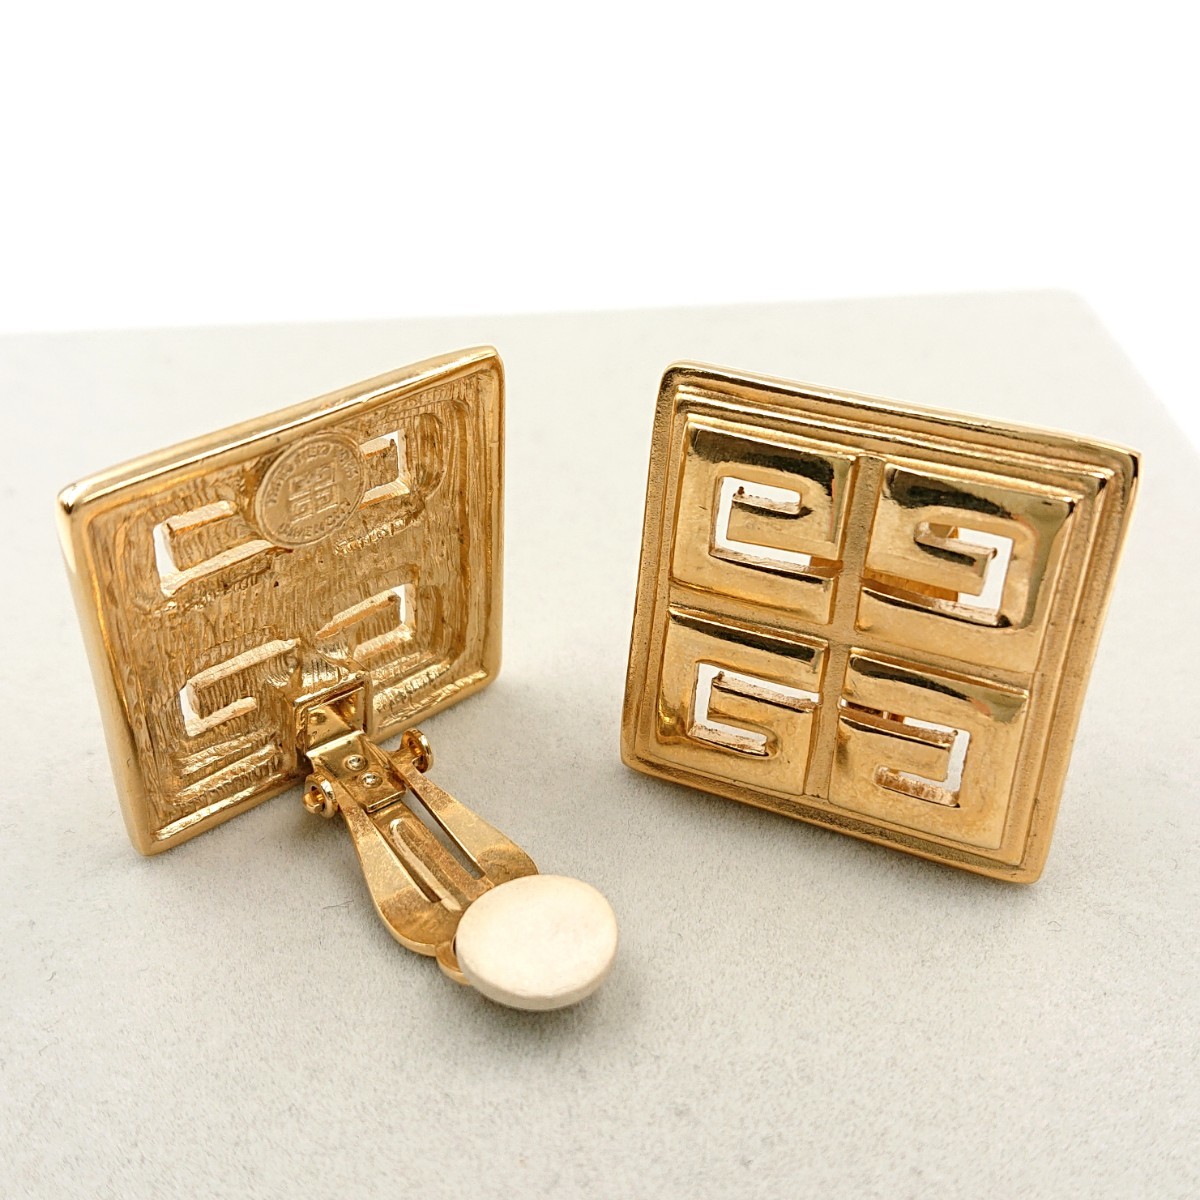 GIVENCHY earrings 